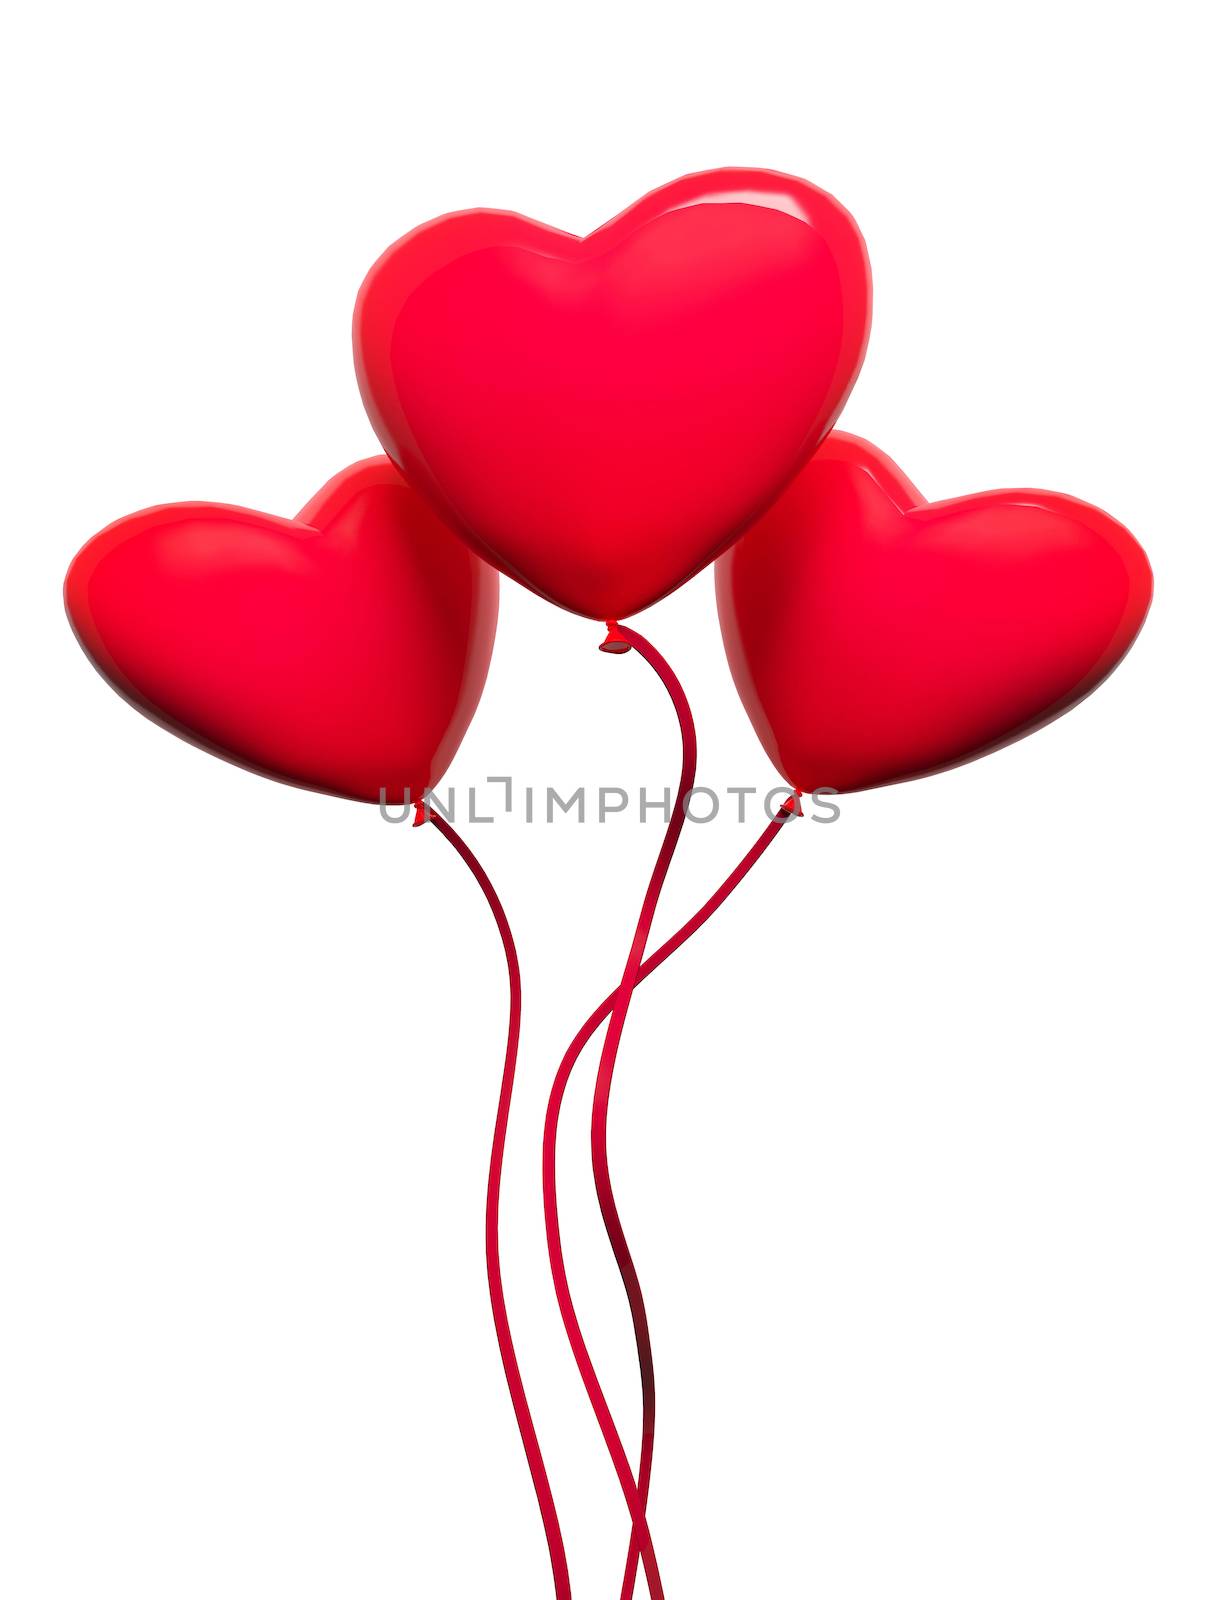 Three red hearts-balloons, isolated on white